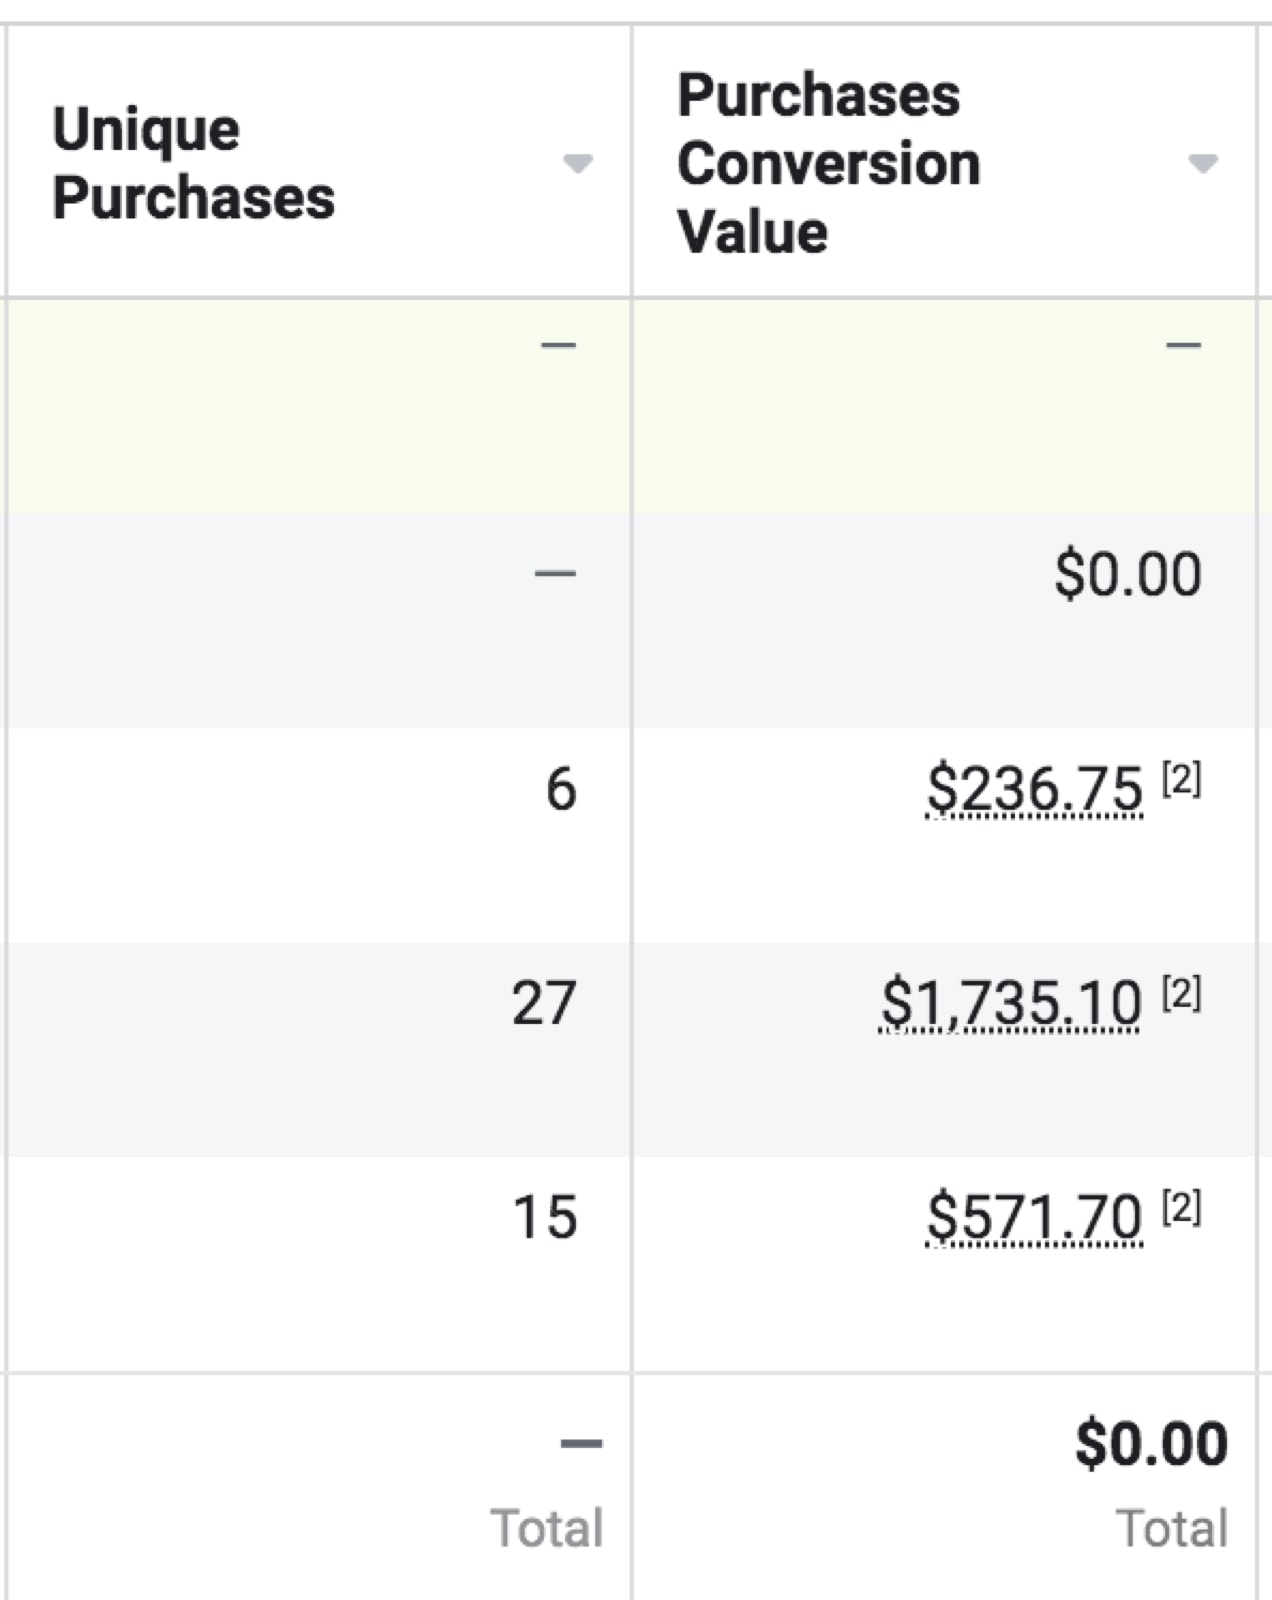 table with unique purchases and purchases conversion values